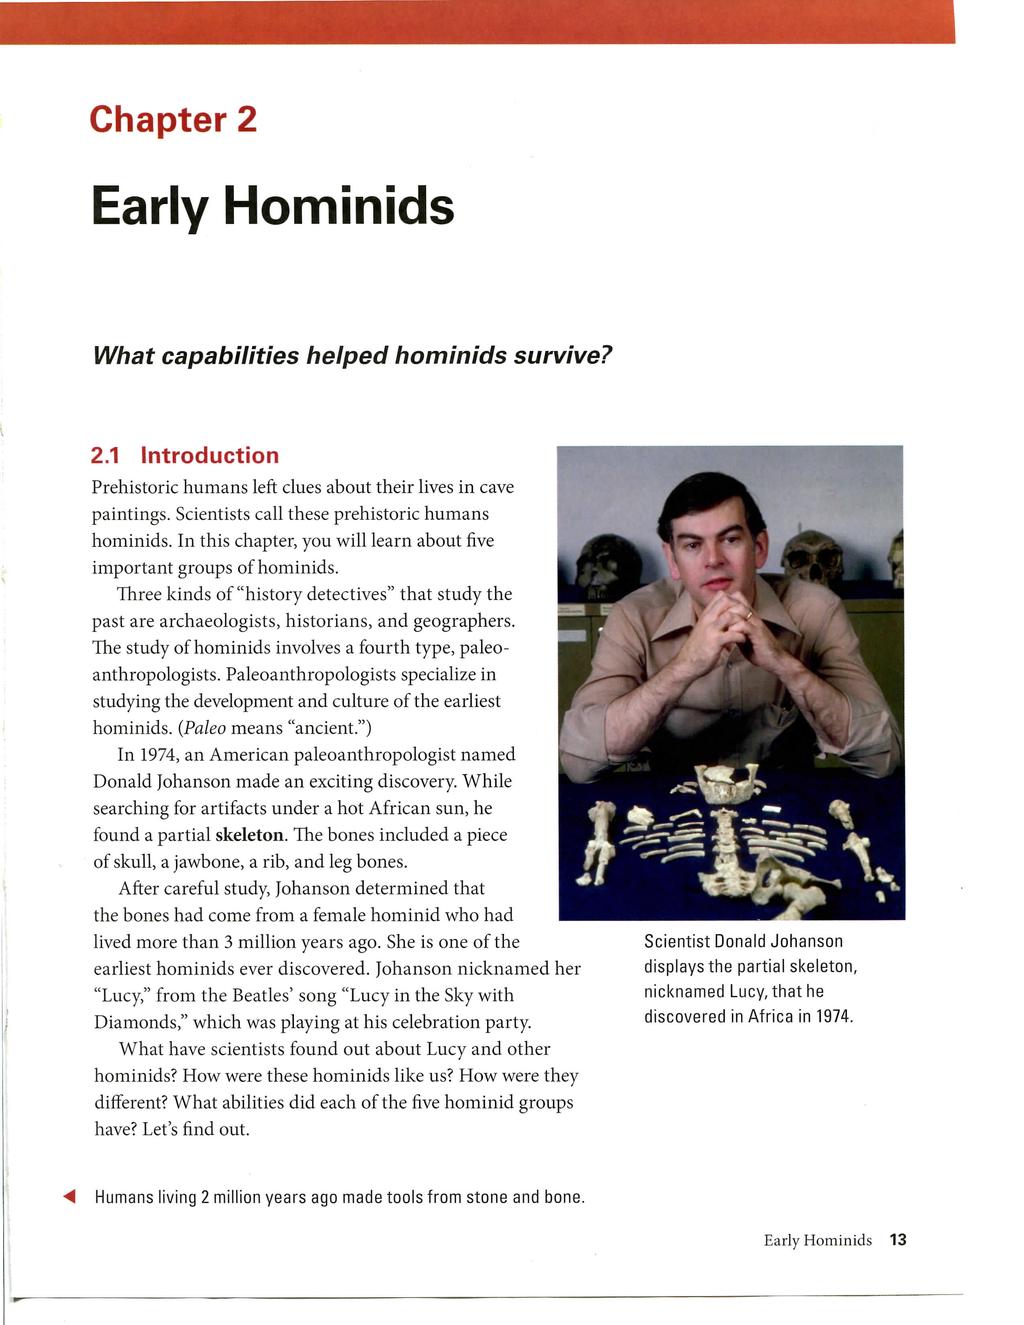 Chapter 2 Early Hominids What capabilities helped hominids survive? 2.1 Introduction Prehistoric humans left clues about their lives in cave paintings.